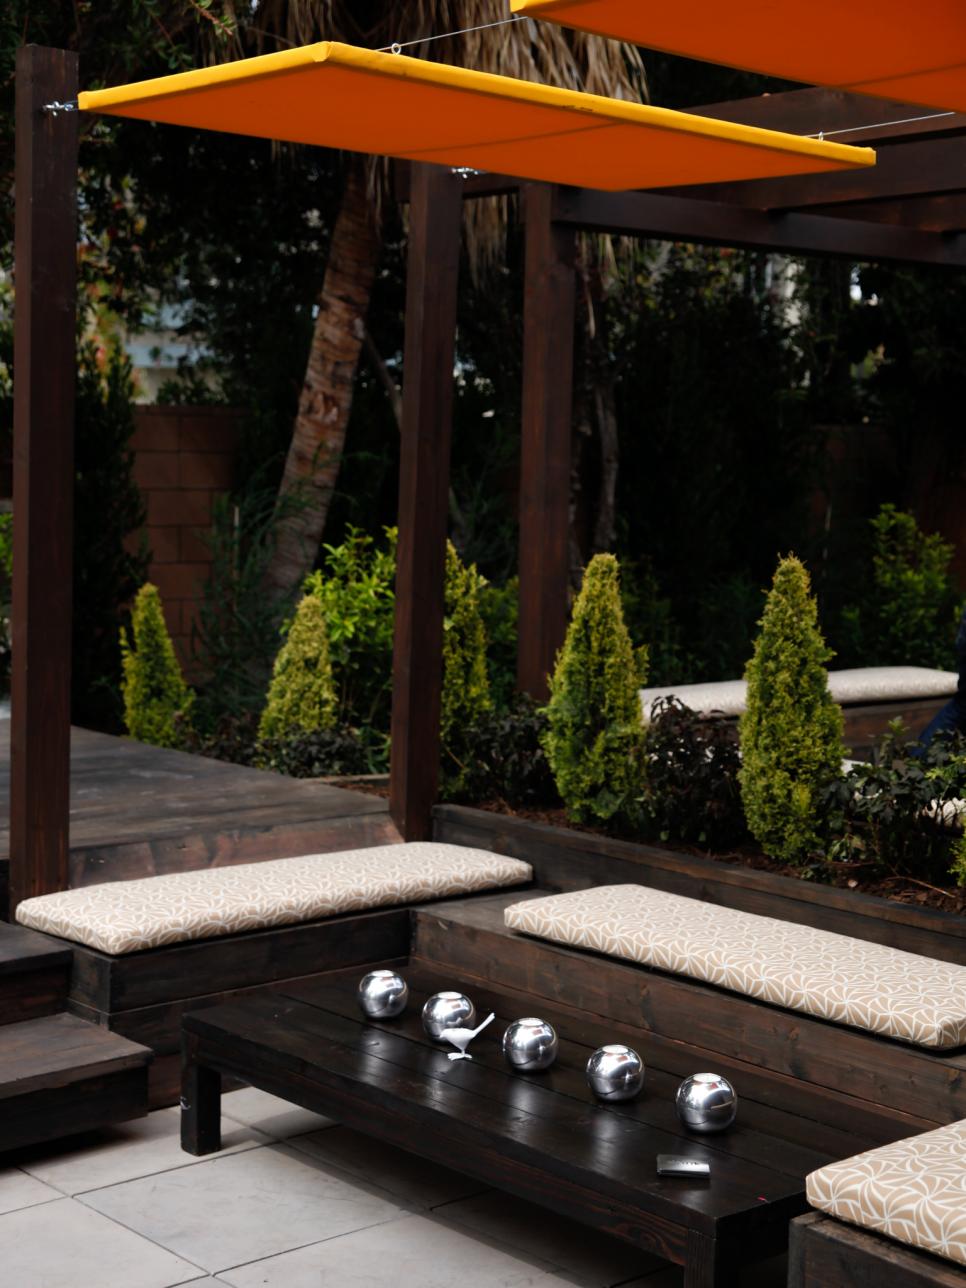 Sunken Patio with Built-In Seating, Pergola, and Orange Shades